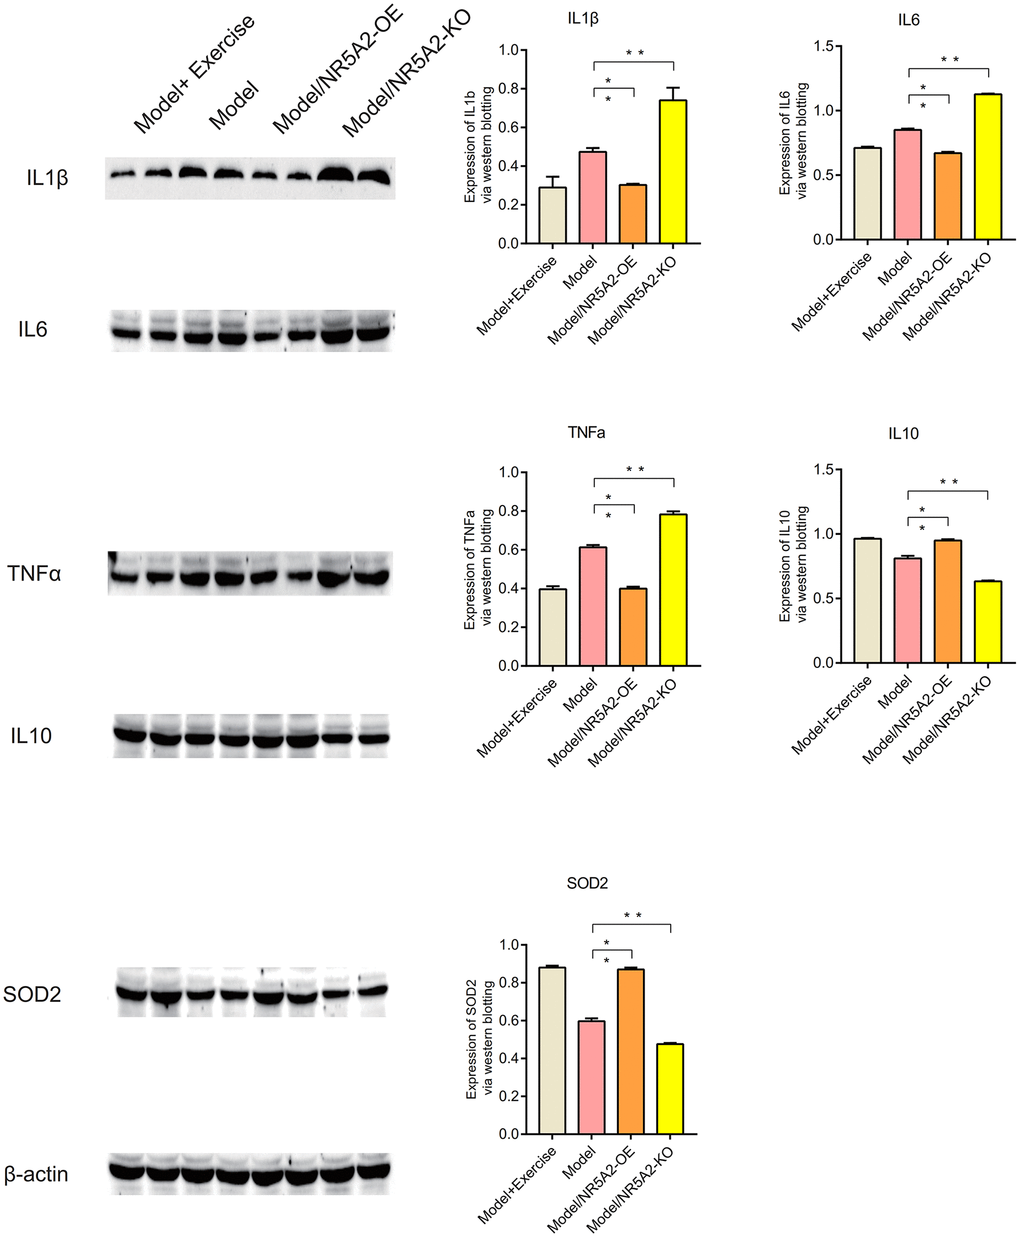 Western blot (WB). The expression levels of IL1β, IL6 and TNFa are down-regulated after exercise. IL10 and SOD2 were up-regulated after exercise (P 